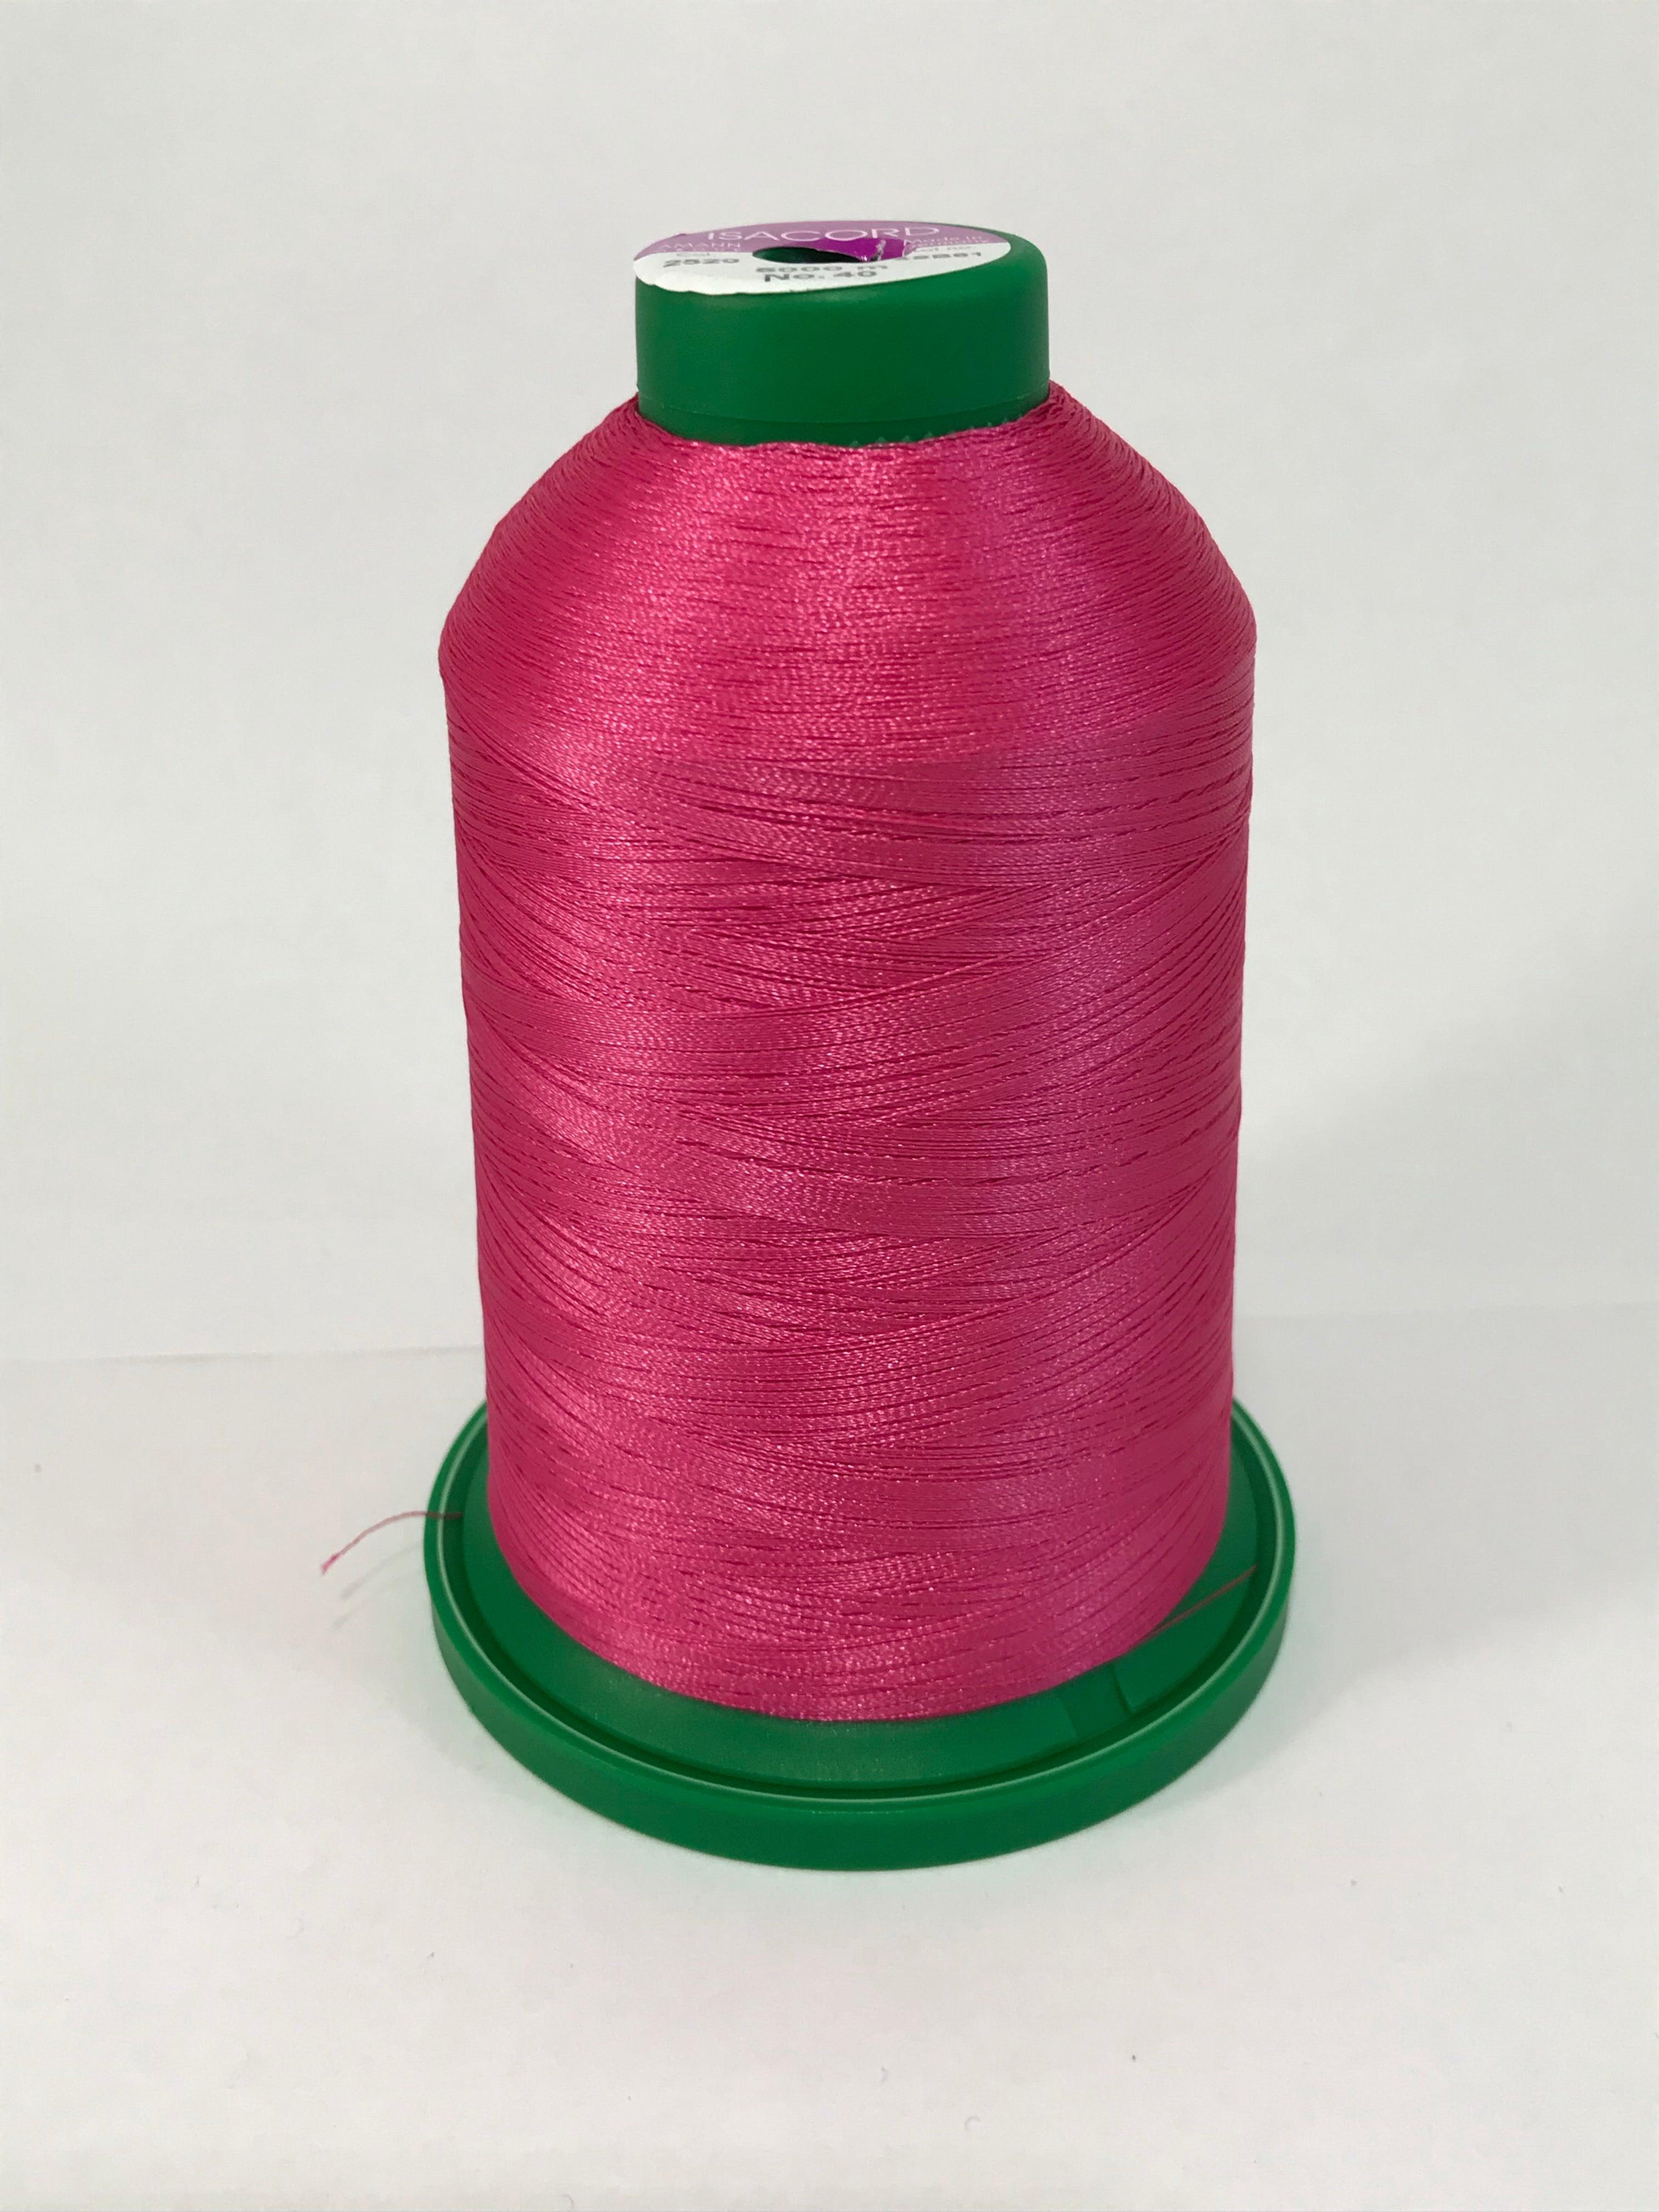 2520 - GARDEN ROSE - ISACORD EMBROIDERY THREAD 40 WT